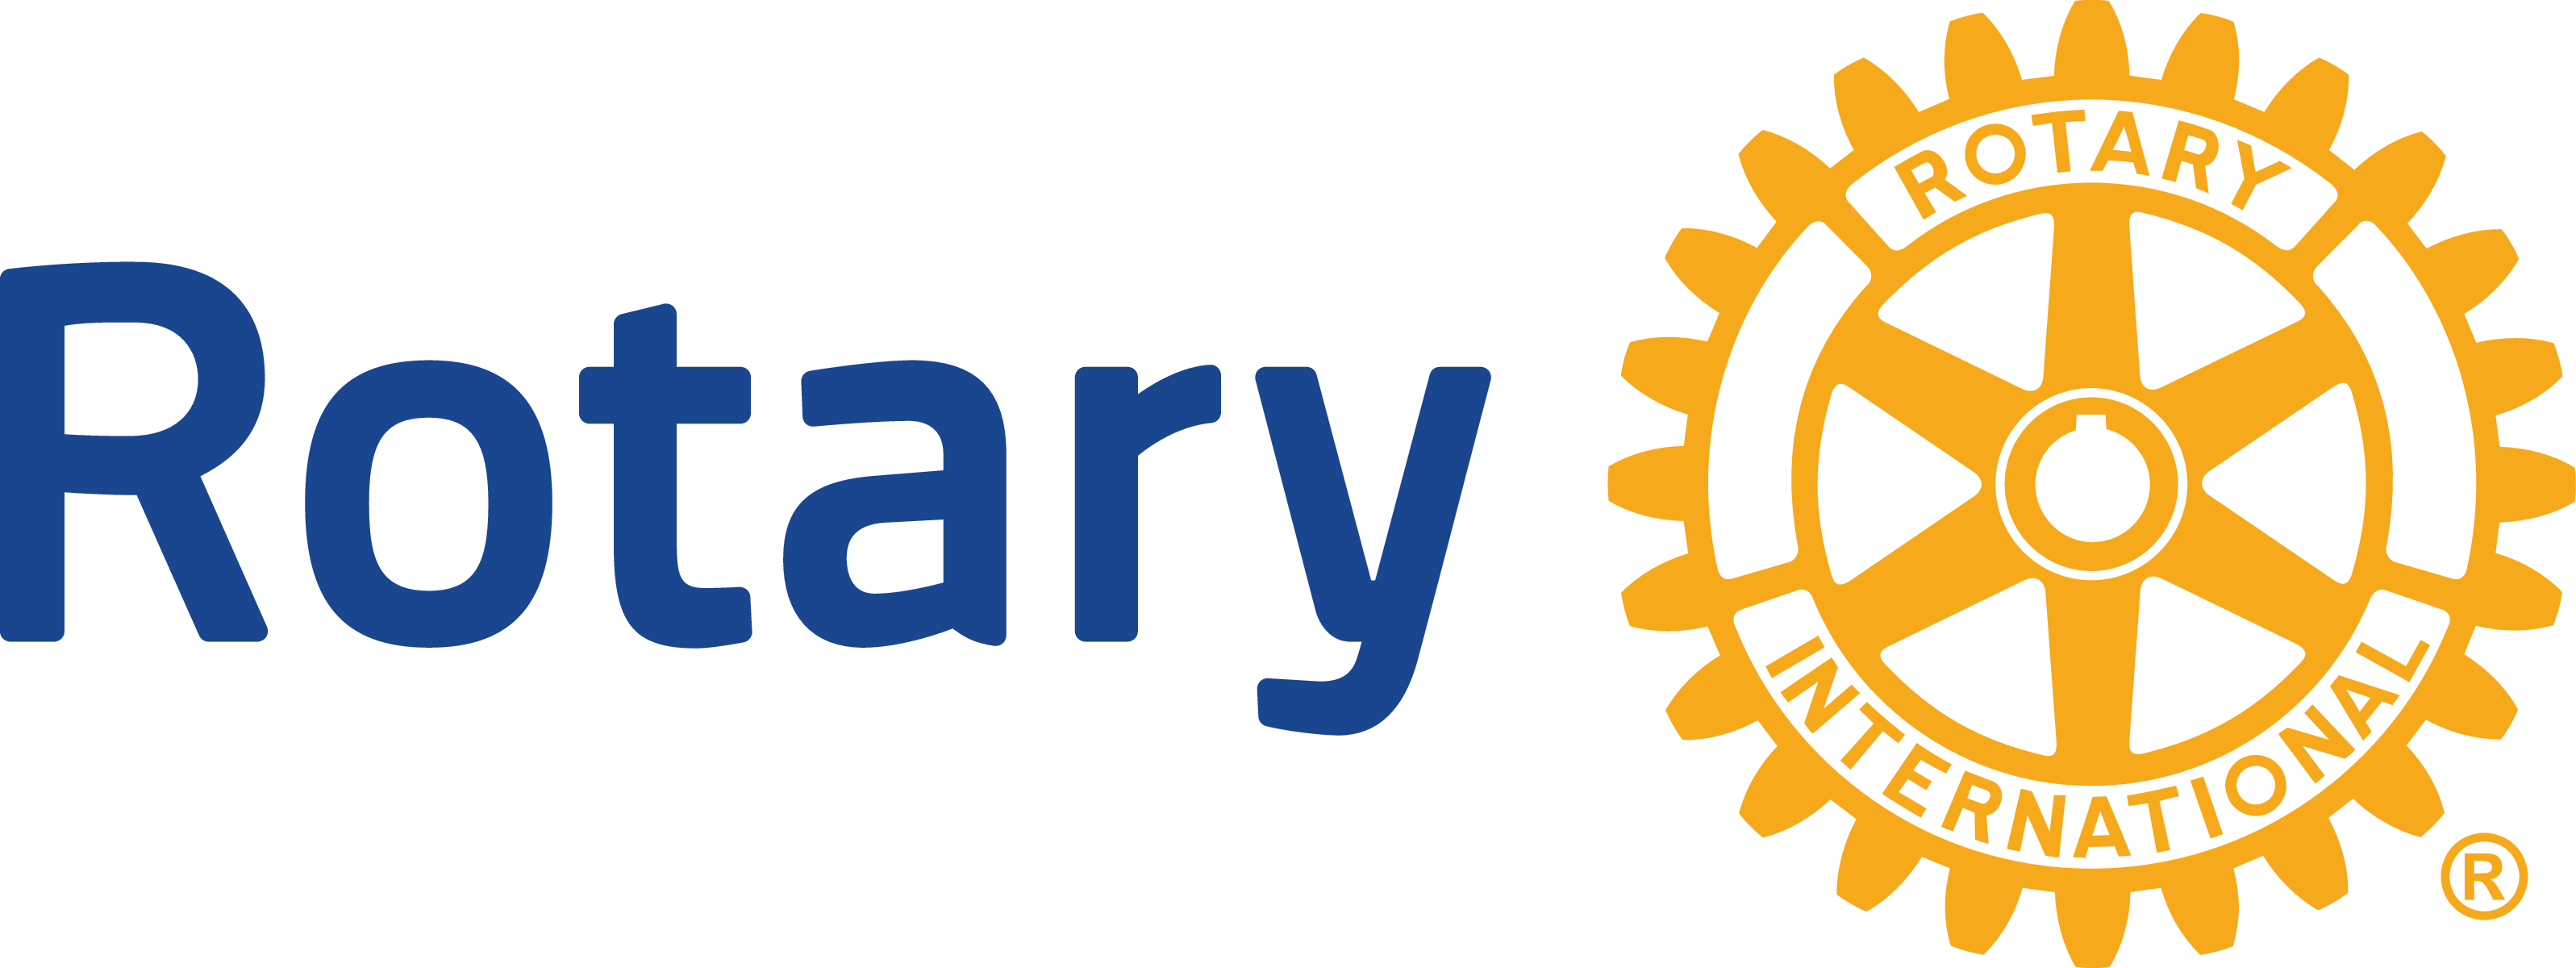 The logo of the Rotary Club